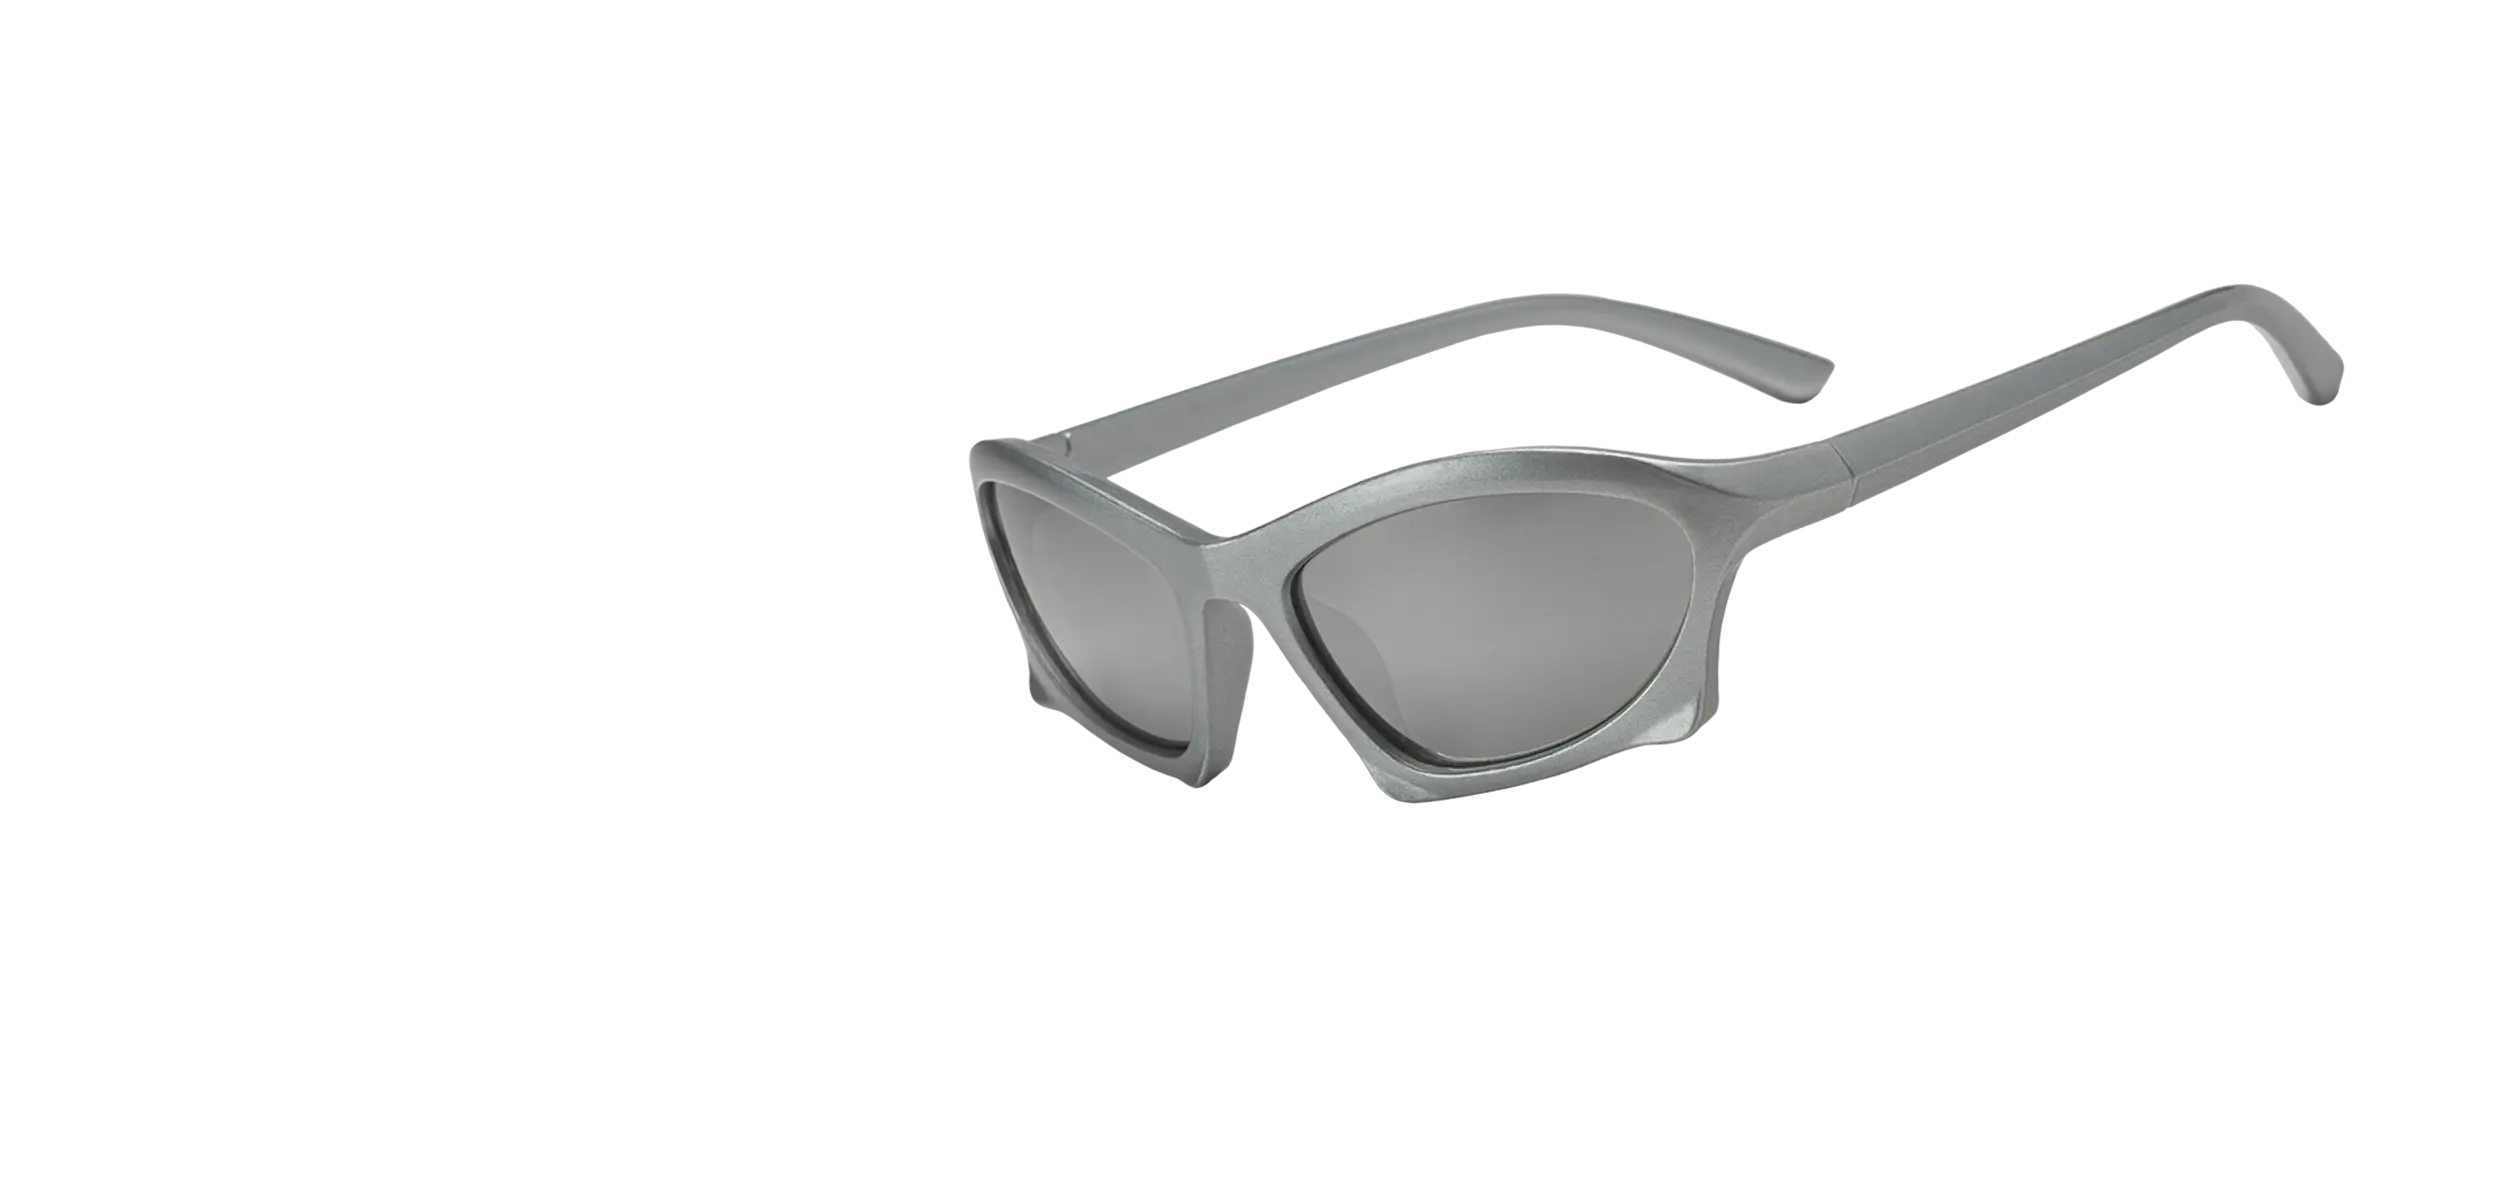 TheShadePrjct Chrome Retro-Futuristic Y2K Sunglasses In Silver And Chrome With 100% UV Protection And Free UK Shipping